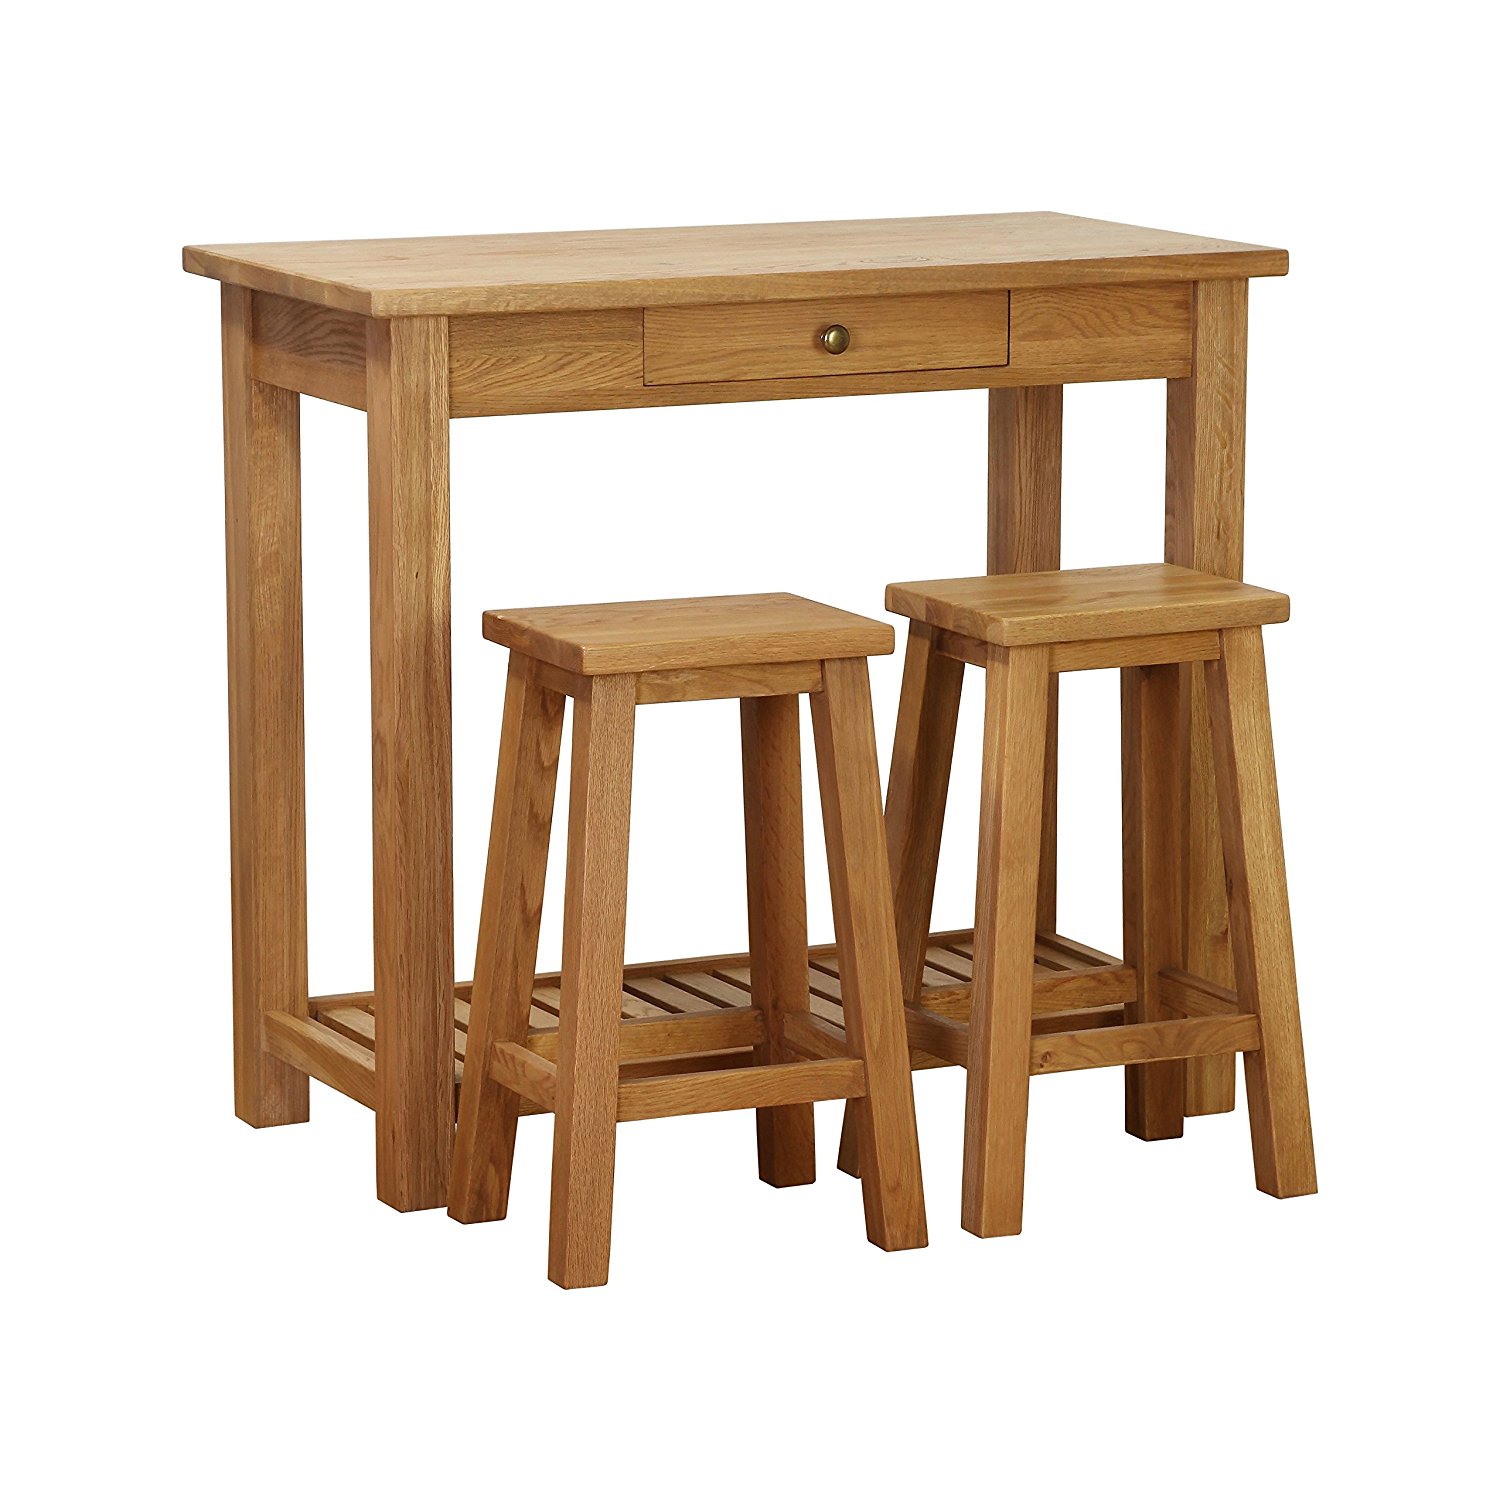 Besp-oak Vancouver Breakfast Table with Two (2) Stools